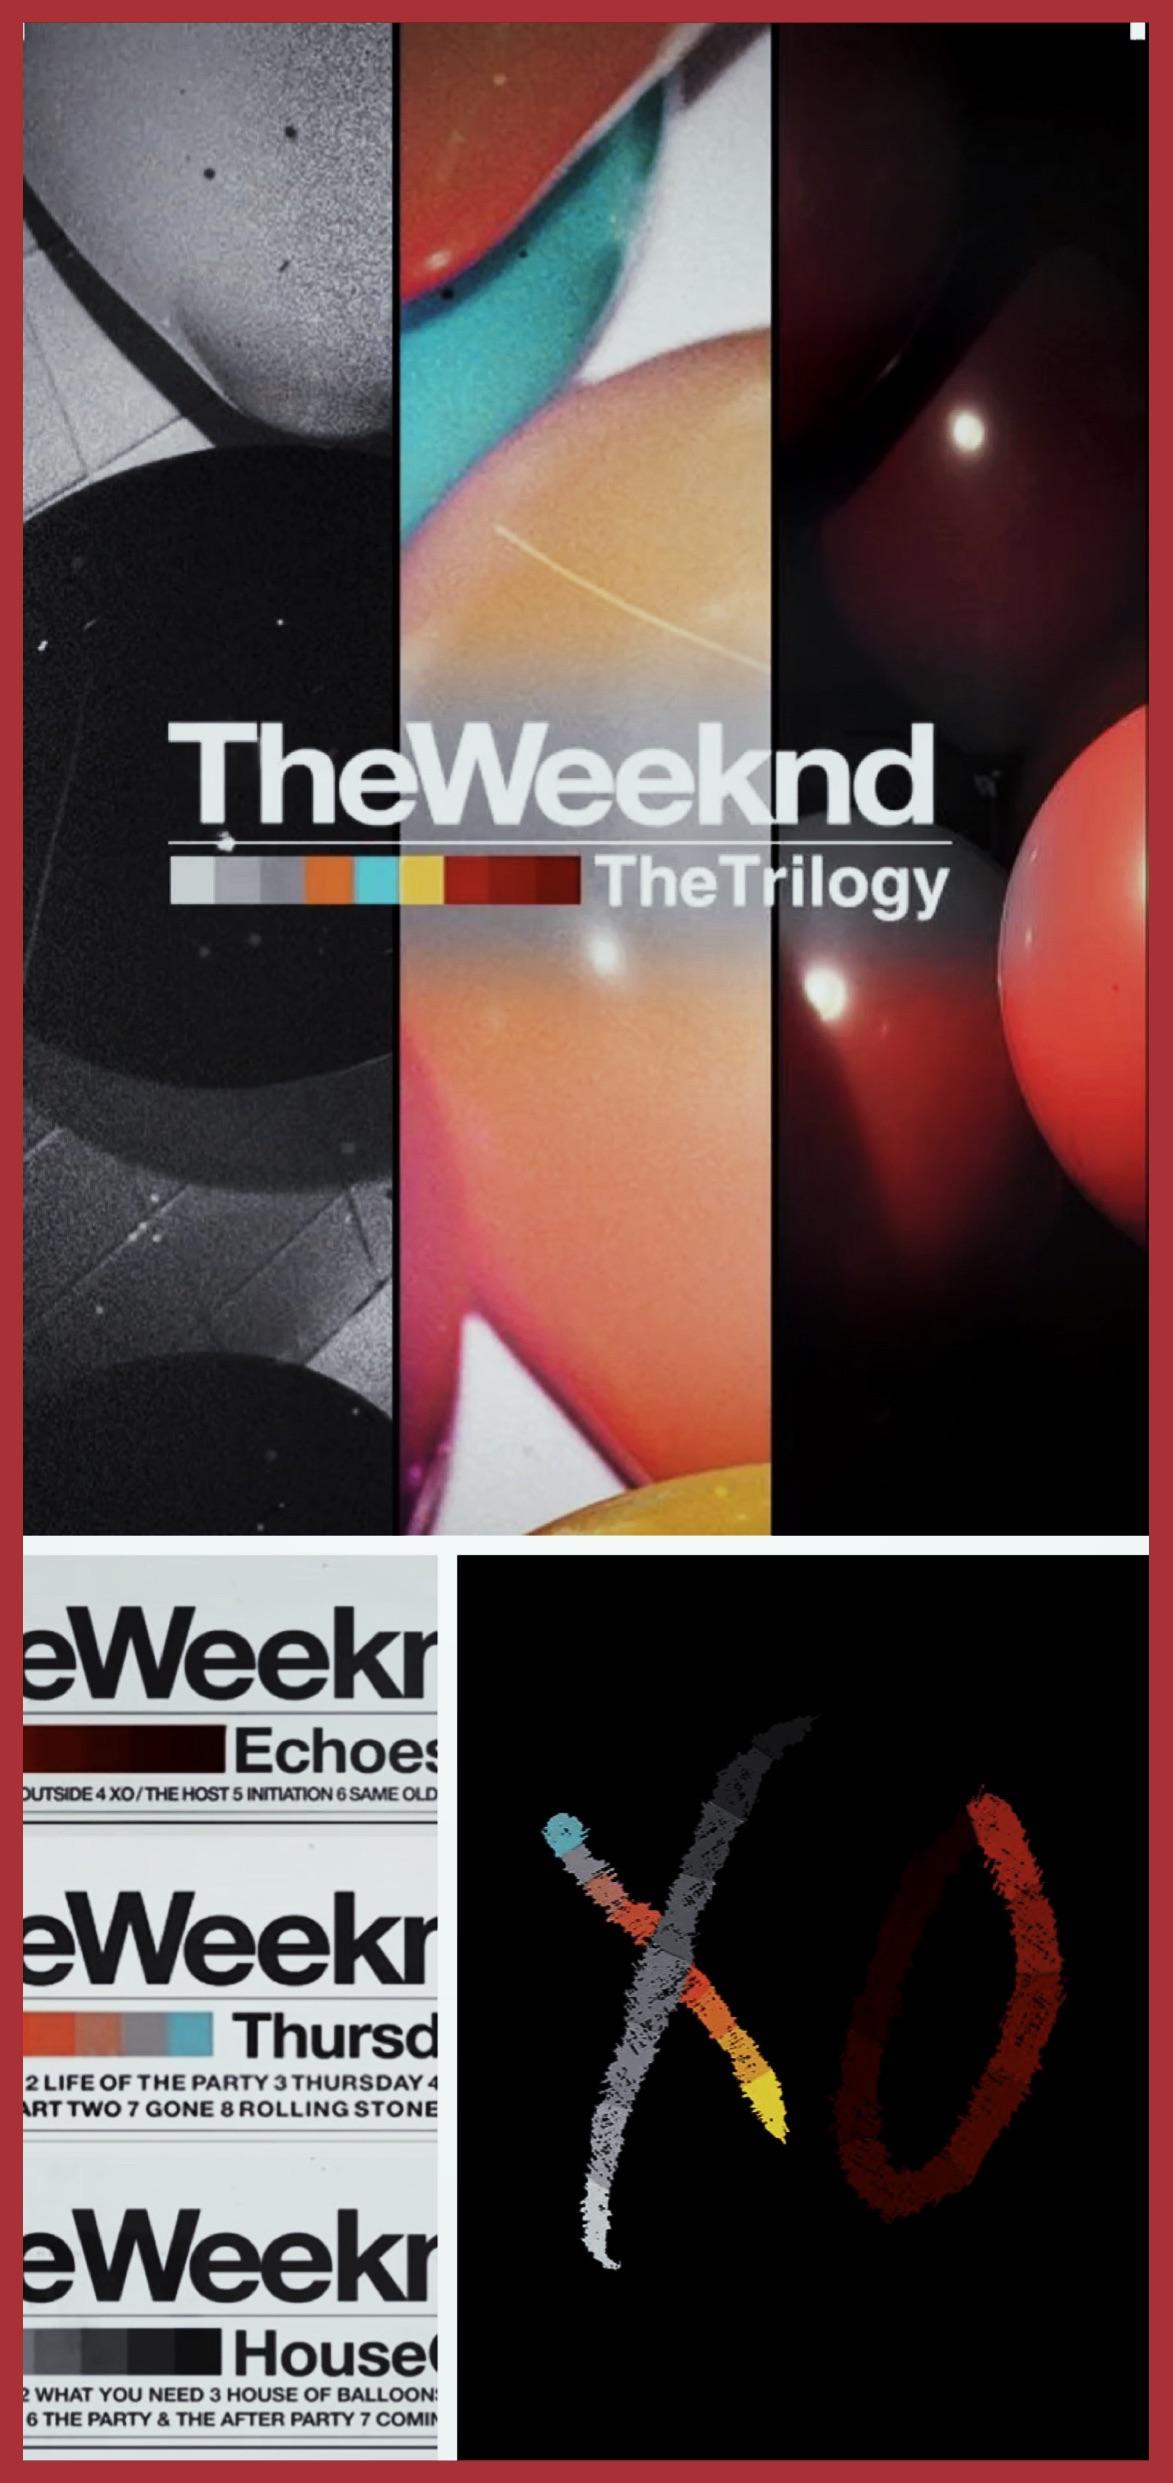 Cool trilogy wallpaper I made from different picture